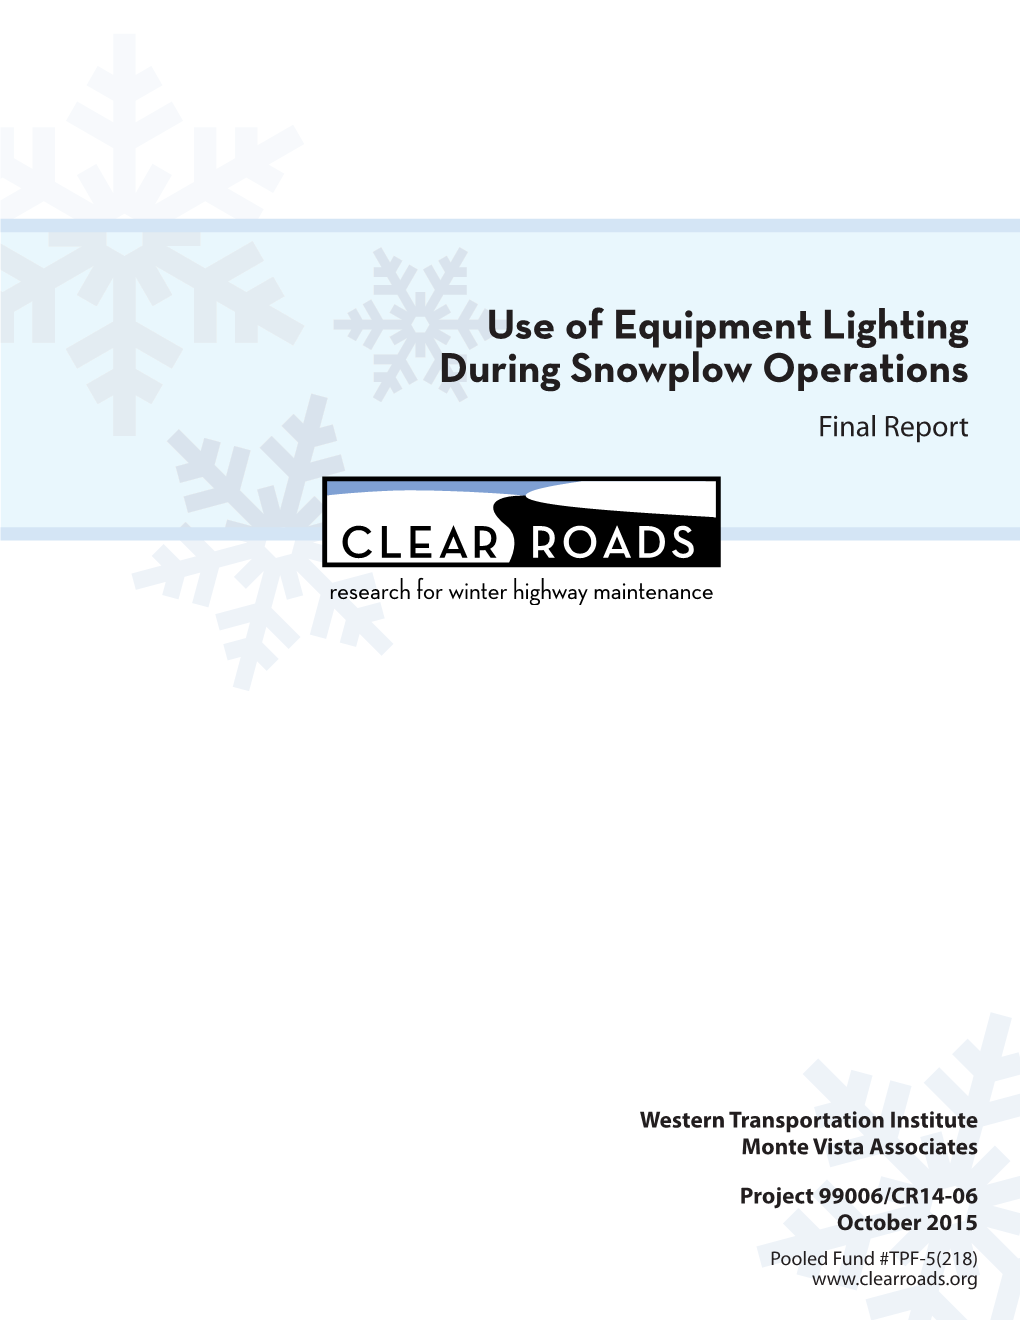 Use of Equipment Lighting During Snowplow Operations Final Report